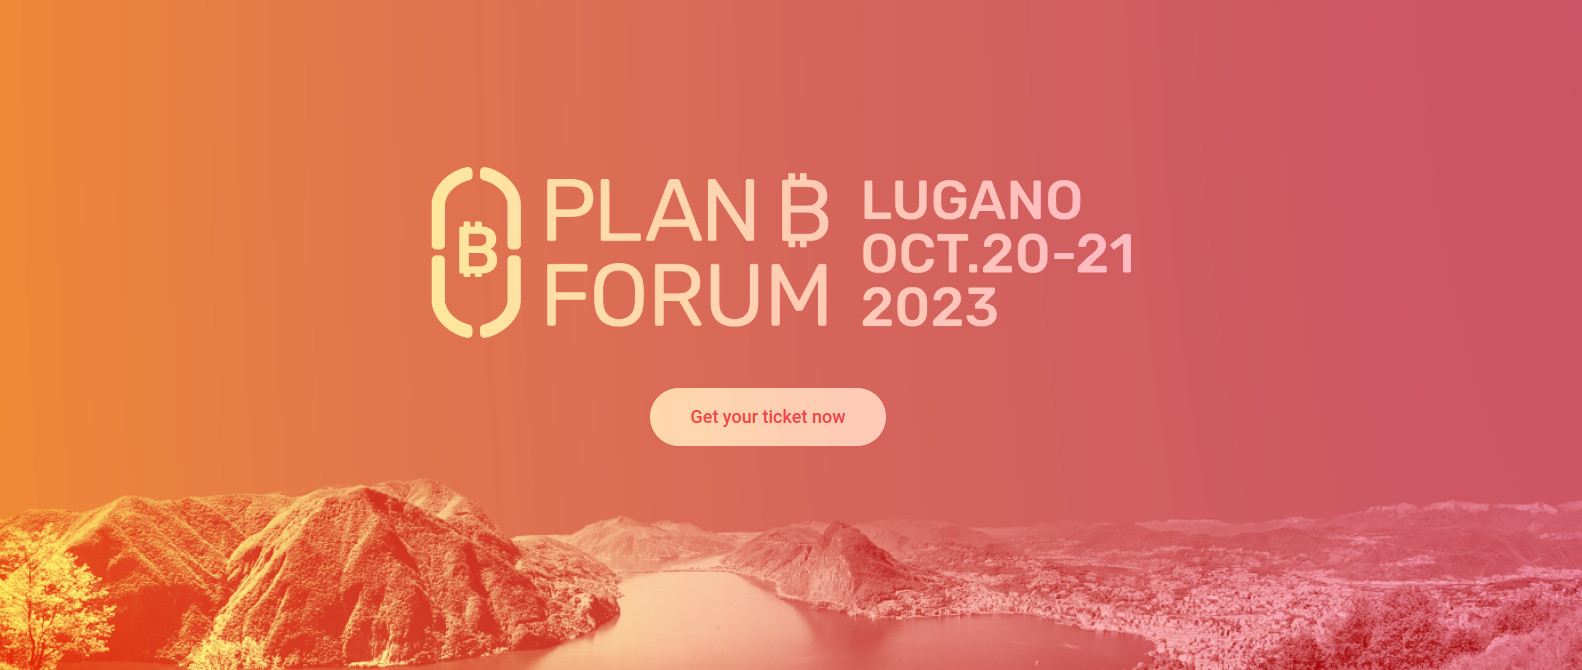 Lugano’s Plan ₿ Forum is the premier Bitcoin conference bringing together world leaders, technologists, and entrepreneurs to discuss nation-state Bitcoin adoption, economics, financial freedom, and freedom of speech.